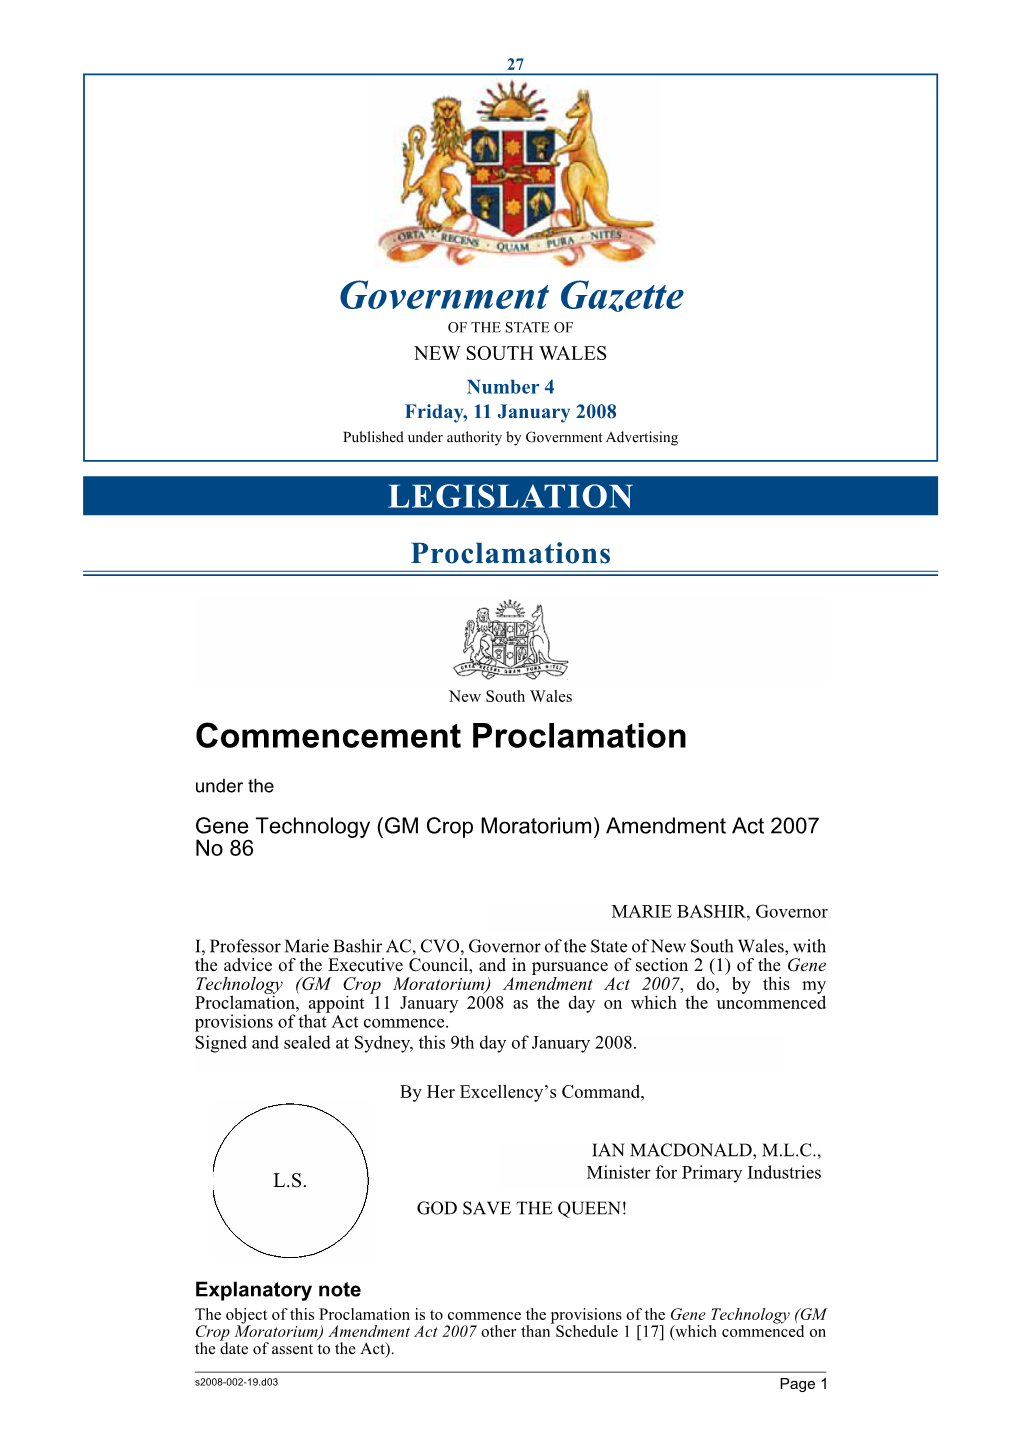 Government Gazette of the STATE of NEW SOUTH WALES Number 4 Friday, 11 January 2008 Published Under Authority by Government Advertising